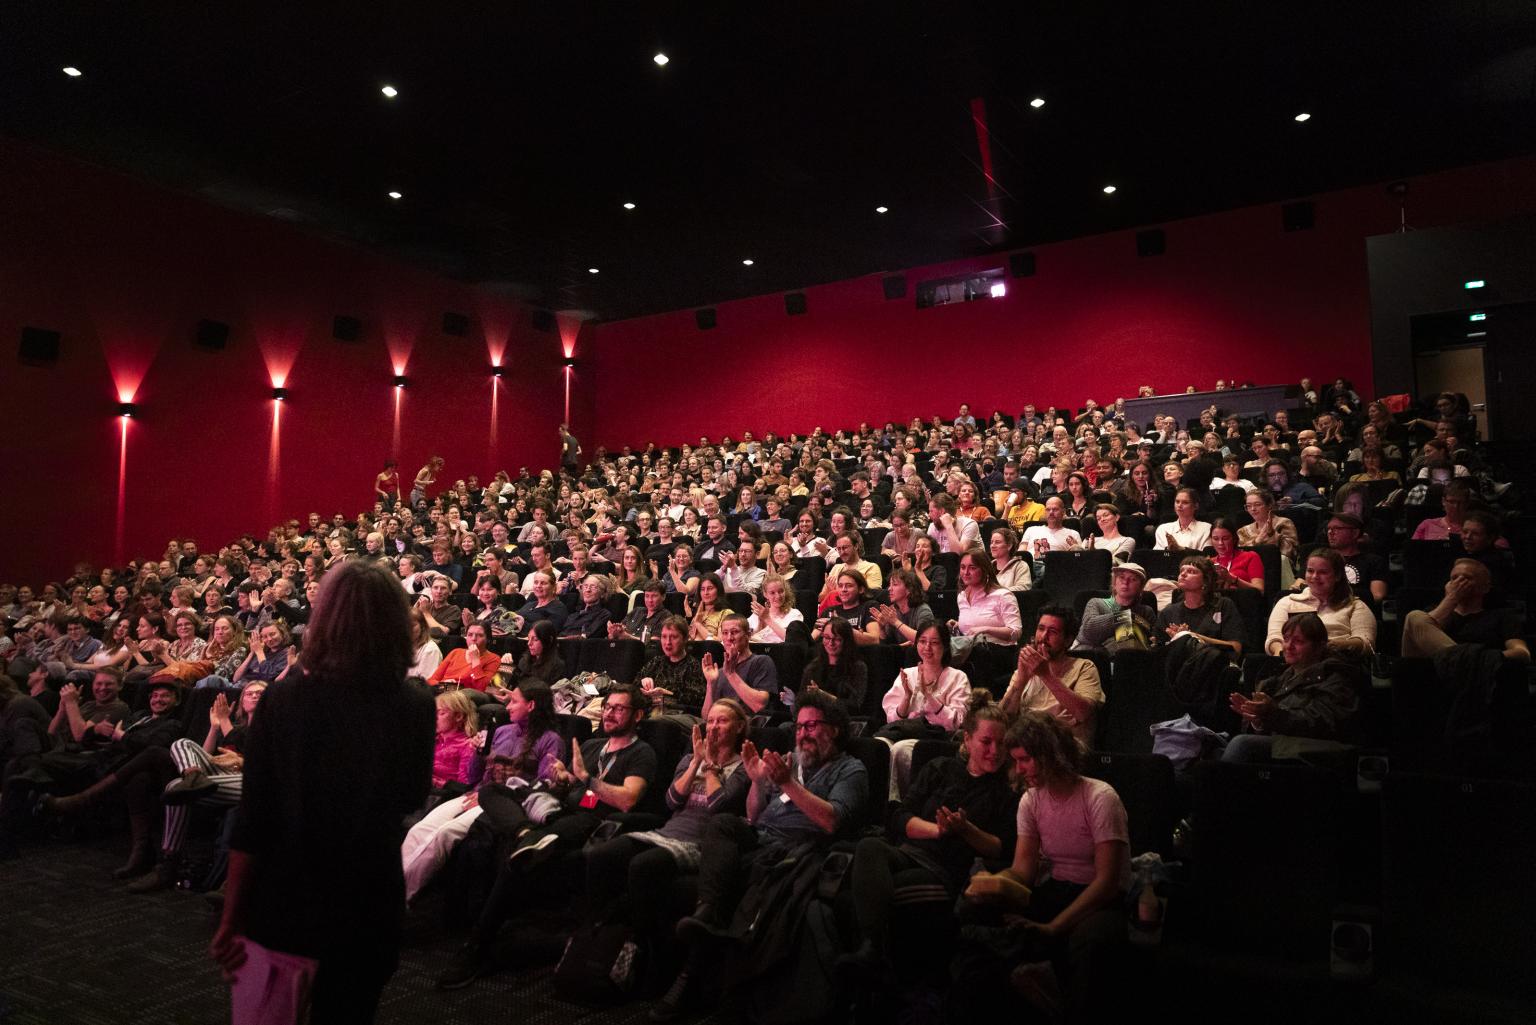 Audience give applause in a fully packed cinema